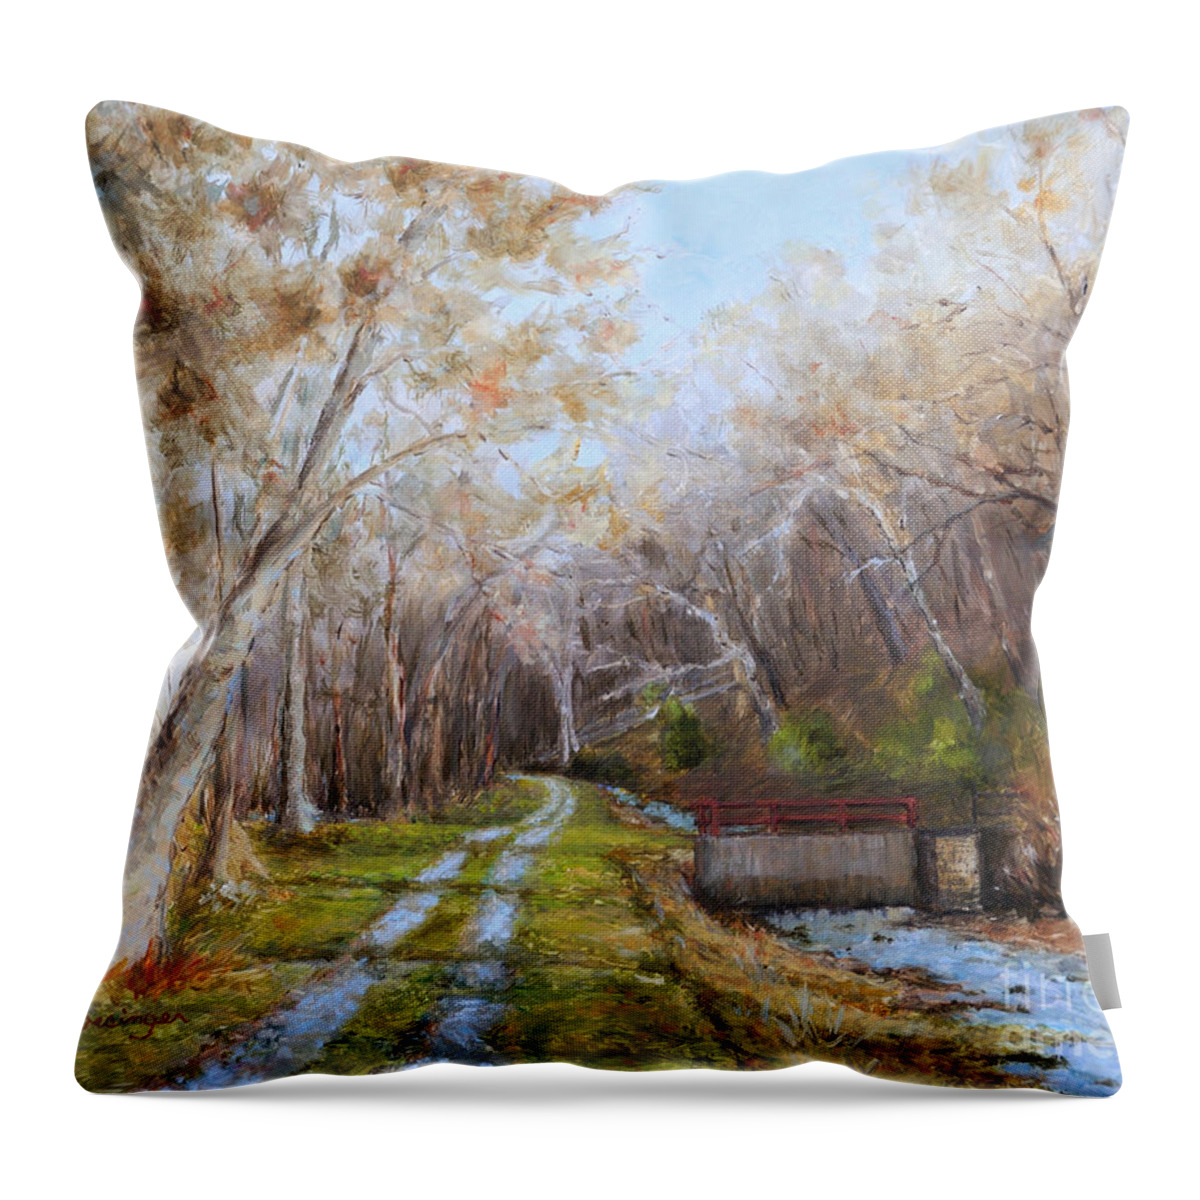 Delaware Canal Throw Pillow featuring the painting Delaware Canal II by Paint Box Studio